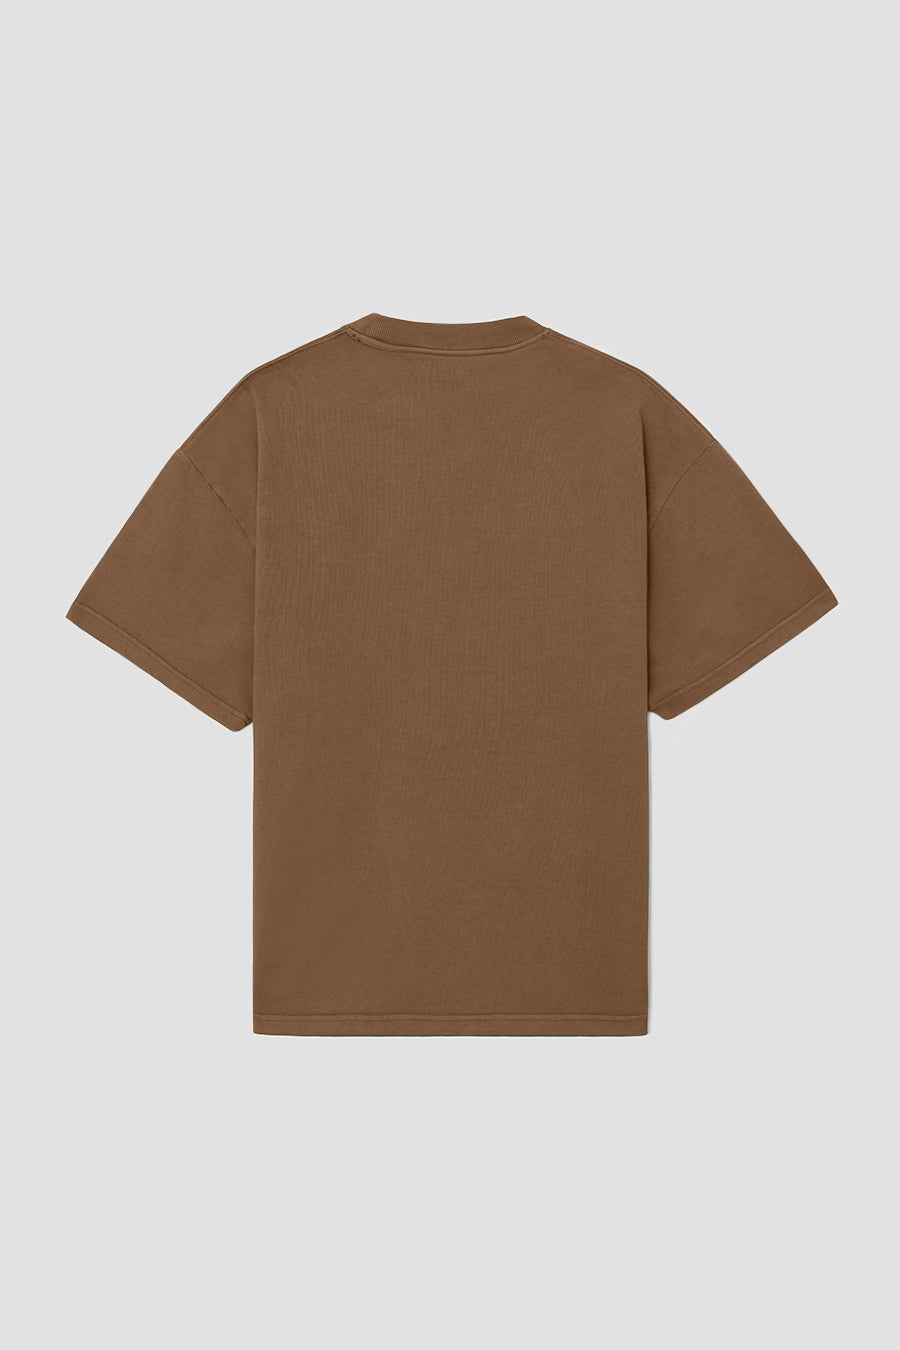 Brown T-Shirt - only available in wholesale